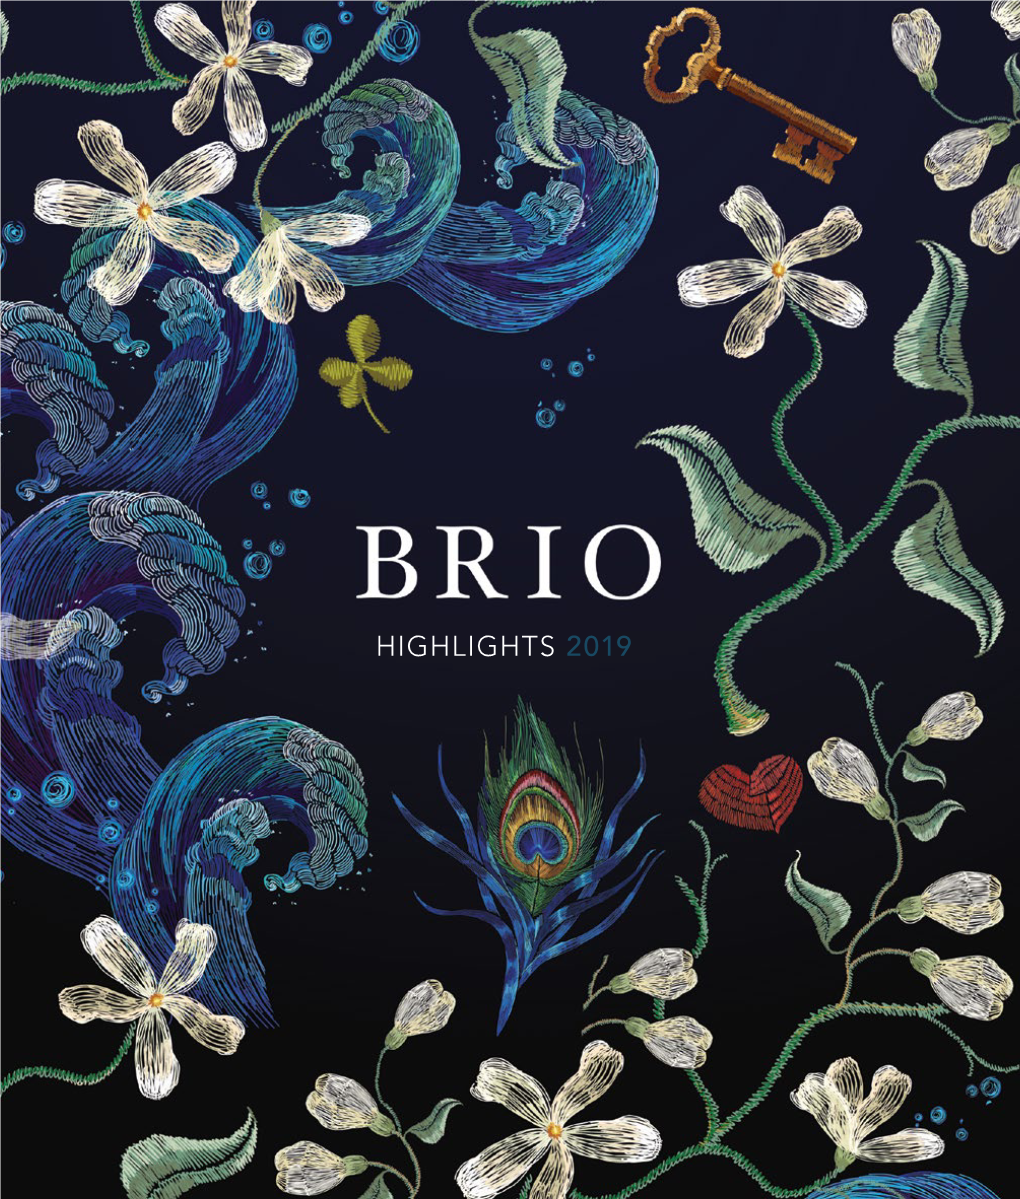 HIGHLIGHTS 2019 Welcome to Brio Books’ 2019 Highlights Catalogue